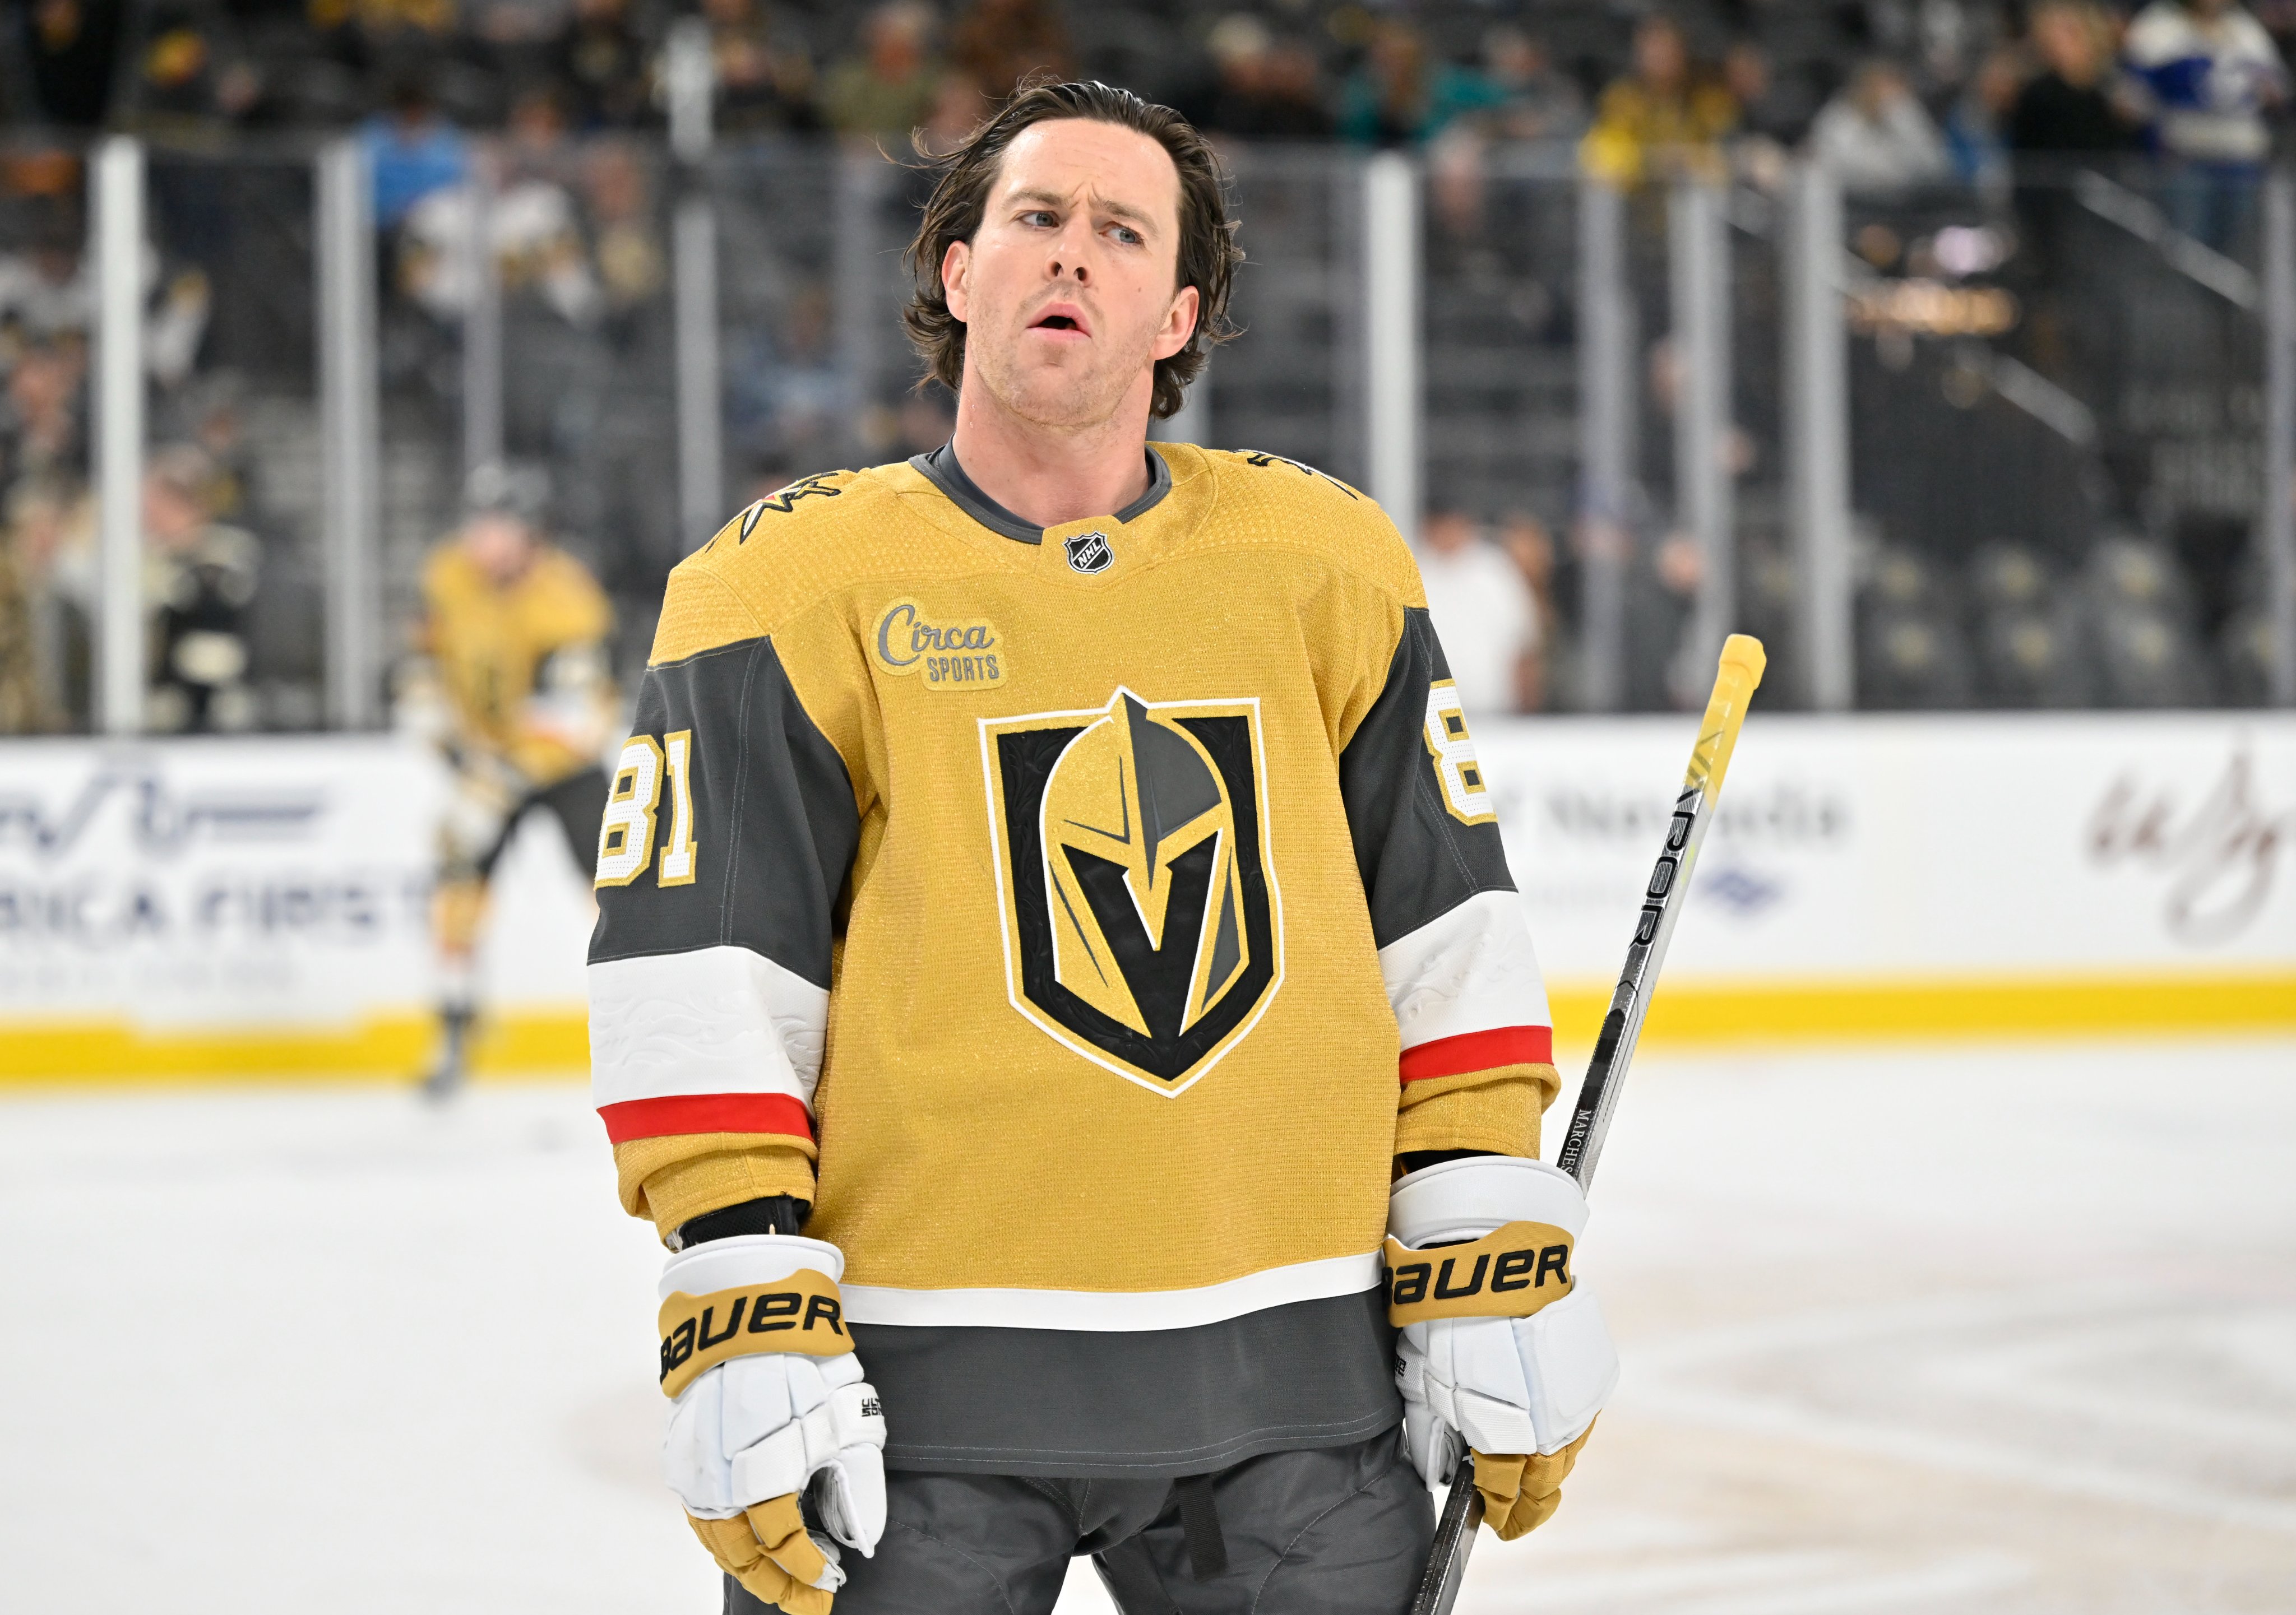 Vegas Golden Knights on X: when the fan next to you is wearing a